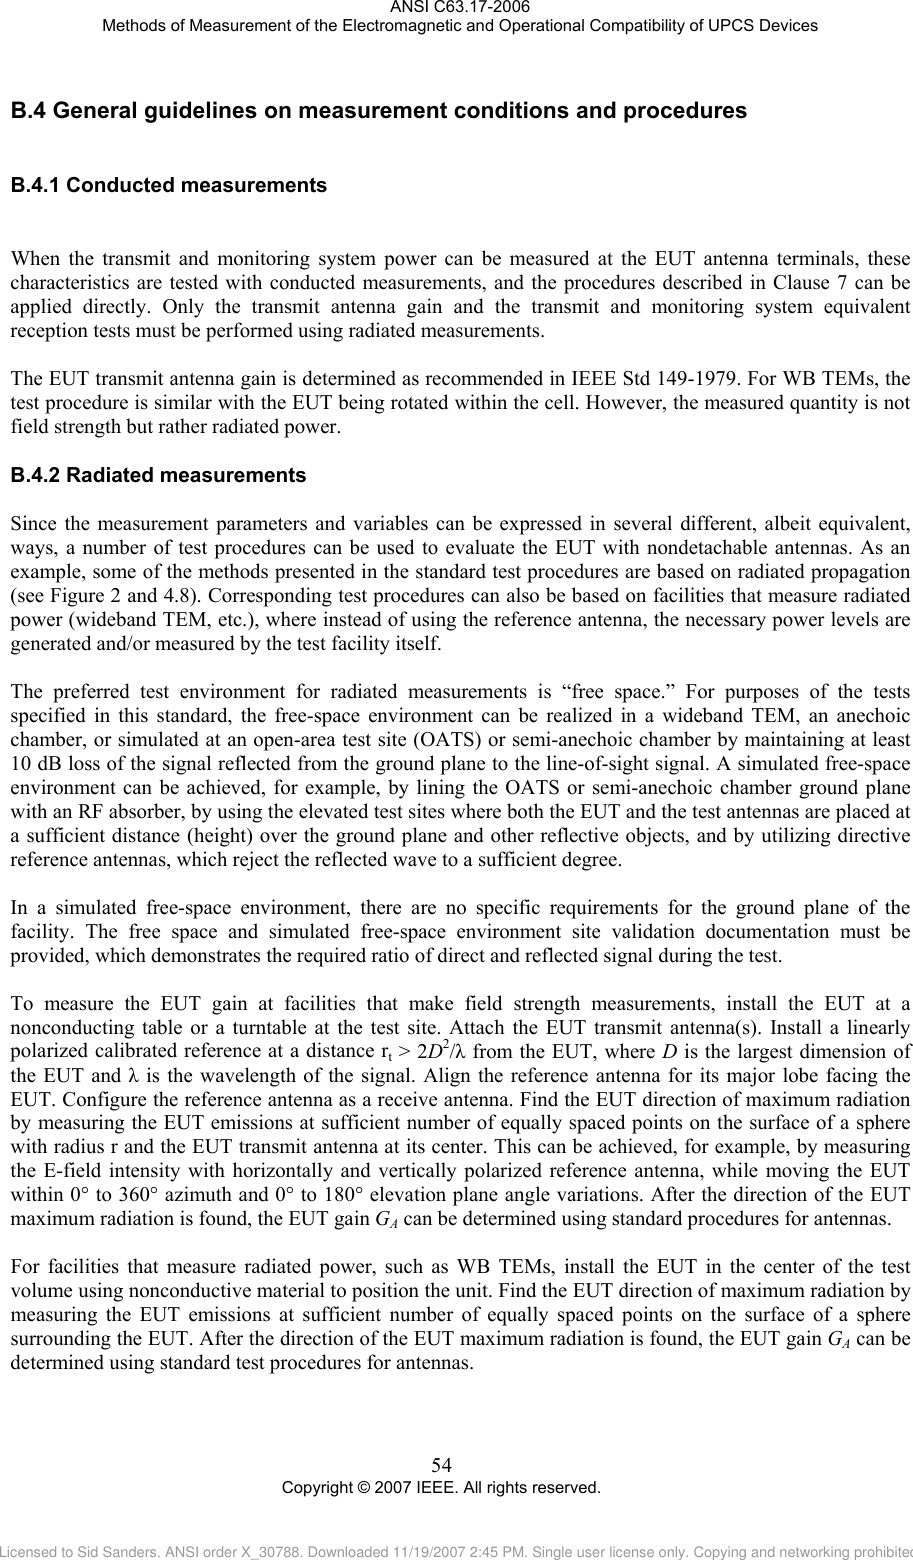 ANSI C63.17-2006 Methods of Measurement of the Electromagnetic and Operational Compatibility of UPCS Devices B.4B.4.1B.4.2 General guidelines on measurement conditions and procedures  Conducted measurements  When the transmit and monitoring system power can be measured at the EUT antenna terminals, these characteristics are tested with conducted measurements, and the procedures described in Clause 7 can be applied directly. Only the transmit antenna gain and the transmit and monitoring system equivalent reception tests must be performed using radiated measurements.   The EUT transmit antenna gain is determined as recommended in IEEE Std 149-1979. For WB TEMs, the test procedure is similar with the EUT being rotated within the cell. However, the measured quantity is not field strength but rather radiated power.  Radiated measurements Since the measurement parameters and variables can be expressed in several different, albeit equivalent, ways, a number of test procedures can be used to evaluate the EUT with nondetachable antennas. As an example, some of the methods presented in the standard test procedures are based on radiated propagation (see Figure 2 and 4.8). Corresponding test procedures can also be based on facilities that measure radiated power (wideband TEM, etc.), where instead of using the reference antenna, the necessary power levels are generated and/or measured by the test facility itself.  The preferred test environment for radiated measurements is “free space.” For purposes of the tests specified in this standard, the free-space environment can be realized in a wideband TEM, an anechoic chamber, or simulated at an open-area test site (OATS) or semi-anechoic chamber by maintaining at least 10 dB loss of the signal reflected from the ground plane to the line-of-sight signal. A simulated free-space environment can be achieved, for example, by lining the OATS or semi-anechoic chamber ground plane with an RF absorber, by using the elevated test sites where both the EUT and the test antennas are placed at a sufficient distance (height) over the ground plane and other reflective objects, and by utilizing directive reference antennas, which reject the reflected wave to a sufficient degree.   In a simulated free-space environment, there are no specific requirements for the ground plane of the facility. The free space and simulated free-space environment site validation documentation must be provided, which demonstrates the required ratio of direct and reflected signal during the test.  To measure the EUT gain at facilities that make field strength measurements, install the EUT at a nonconducting table or a turntable at the test site. Attach the EUT transmit antenna(s). Install a linearly polarized calibrated reference at a distance rt &gt; 2D2/λ from the EUT, where D is the largest dimension of the EUT and λ is the wavelength of the signal. Align the reference antenna for its major lobe facing the EUT. Configure the reference antenna as a receive antenna. Find the EUT direction of maximum radiation by measuring the EUT emissions at sufficient number of equally spaced points on the surface of a sphere with radius r and the EUT transmit antenna at its center. This can be achieved, for example, by measuring the E-field intensity with horizontally and vertically polarized reference antenna, while moving the EUT within 0° to 360° azimuth and 0° to 180° elevation plane angle variations. After the direction of the EUT maximum radiation is found, the EUT gain GA can be determined using standard procedures for antennas.  For facilities that measure radiated power, such as WB TEMs, install the EUT in the center of the test volume using nonconductive material to position the unit. Find the EUT direction of maximum radiation by measuring the EUT emissions at sufficient number of equally spaced points on the surface of a sphere surrounding the EUT. After the direction of the EUT maximum radiation is found, the EUT gain GA can be determined using standard test procedures for antennas. 54 Copyright © 2007 IEEE. All rights reserved. Licensed to Sid Sanders. ANSI order X_30788. Downloaded 11/19/2007 2:45 PM. Single user license only. Copying and networking prohibited.